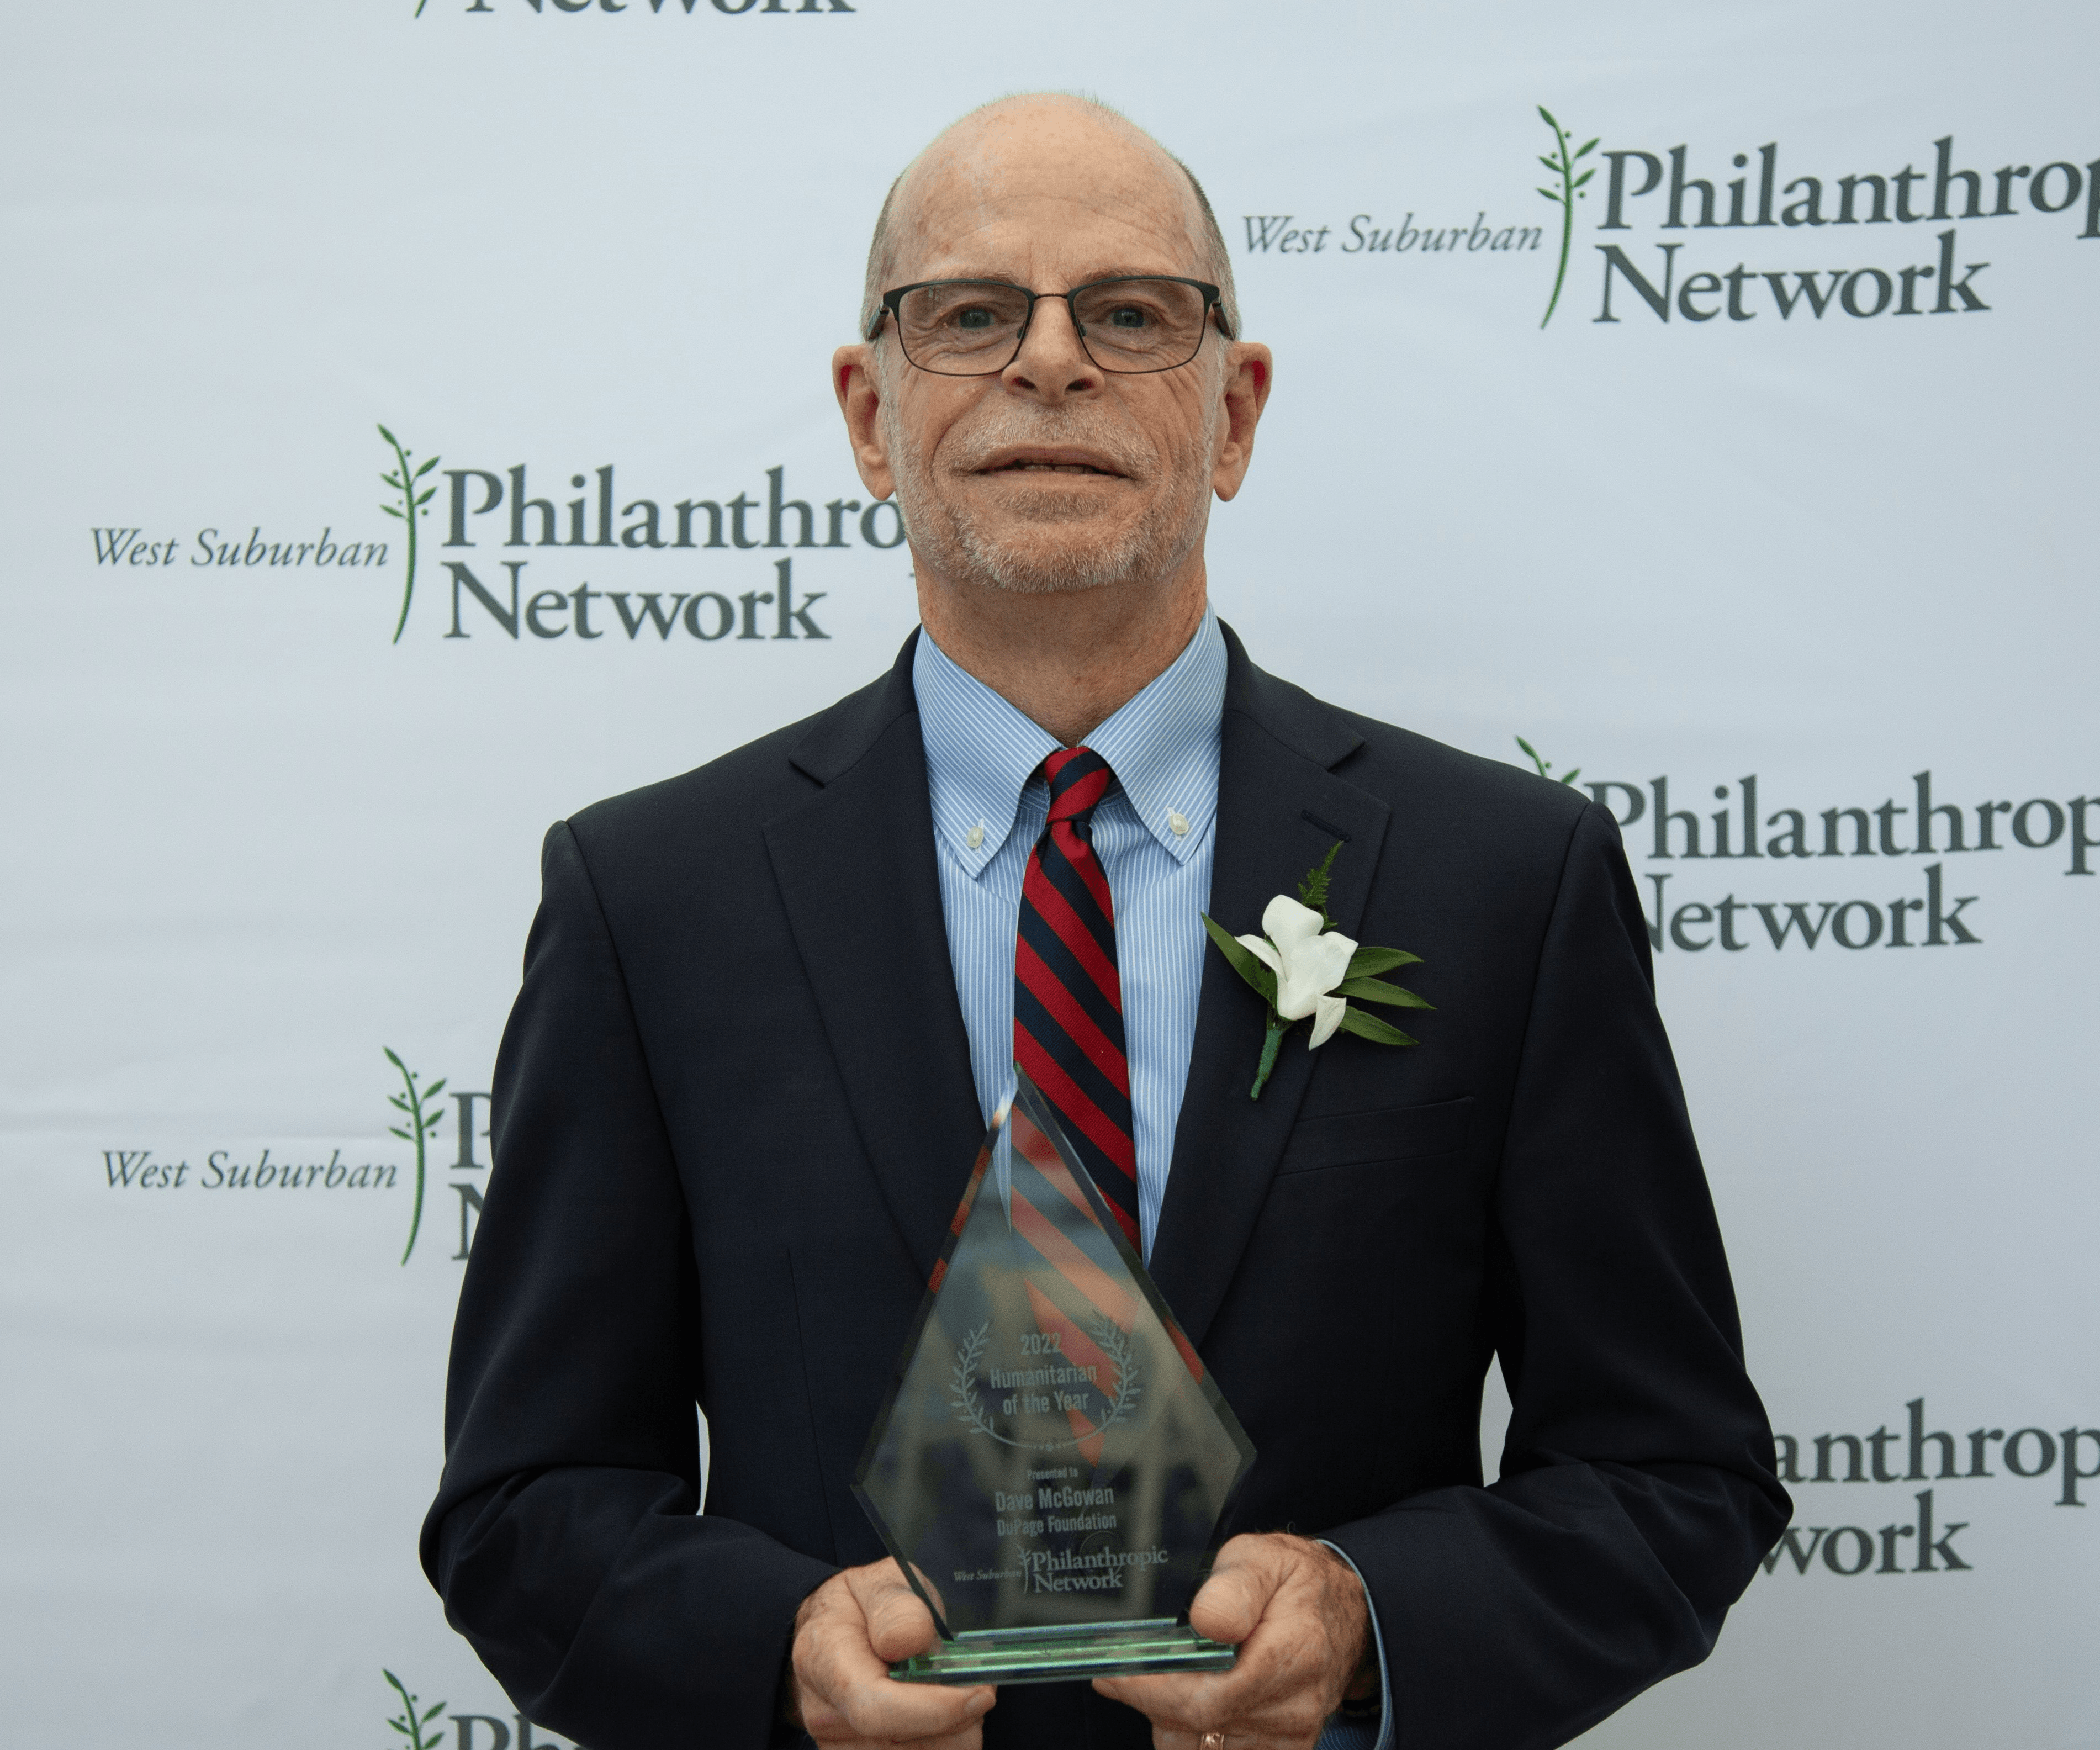 Dave McGowan Named “Humanitarian of the Year” by West Suburban Philanthropic Network